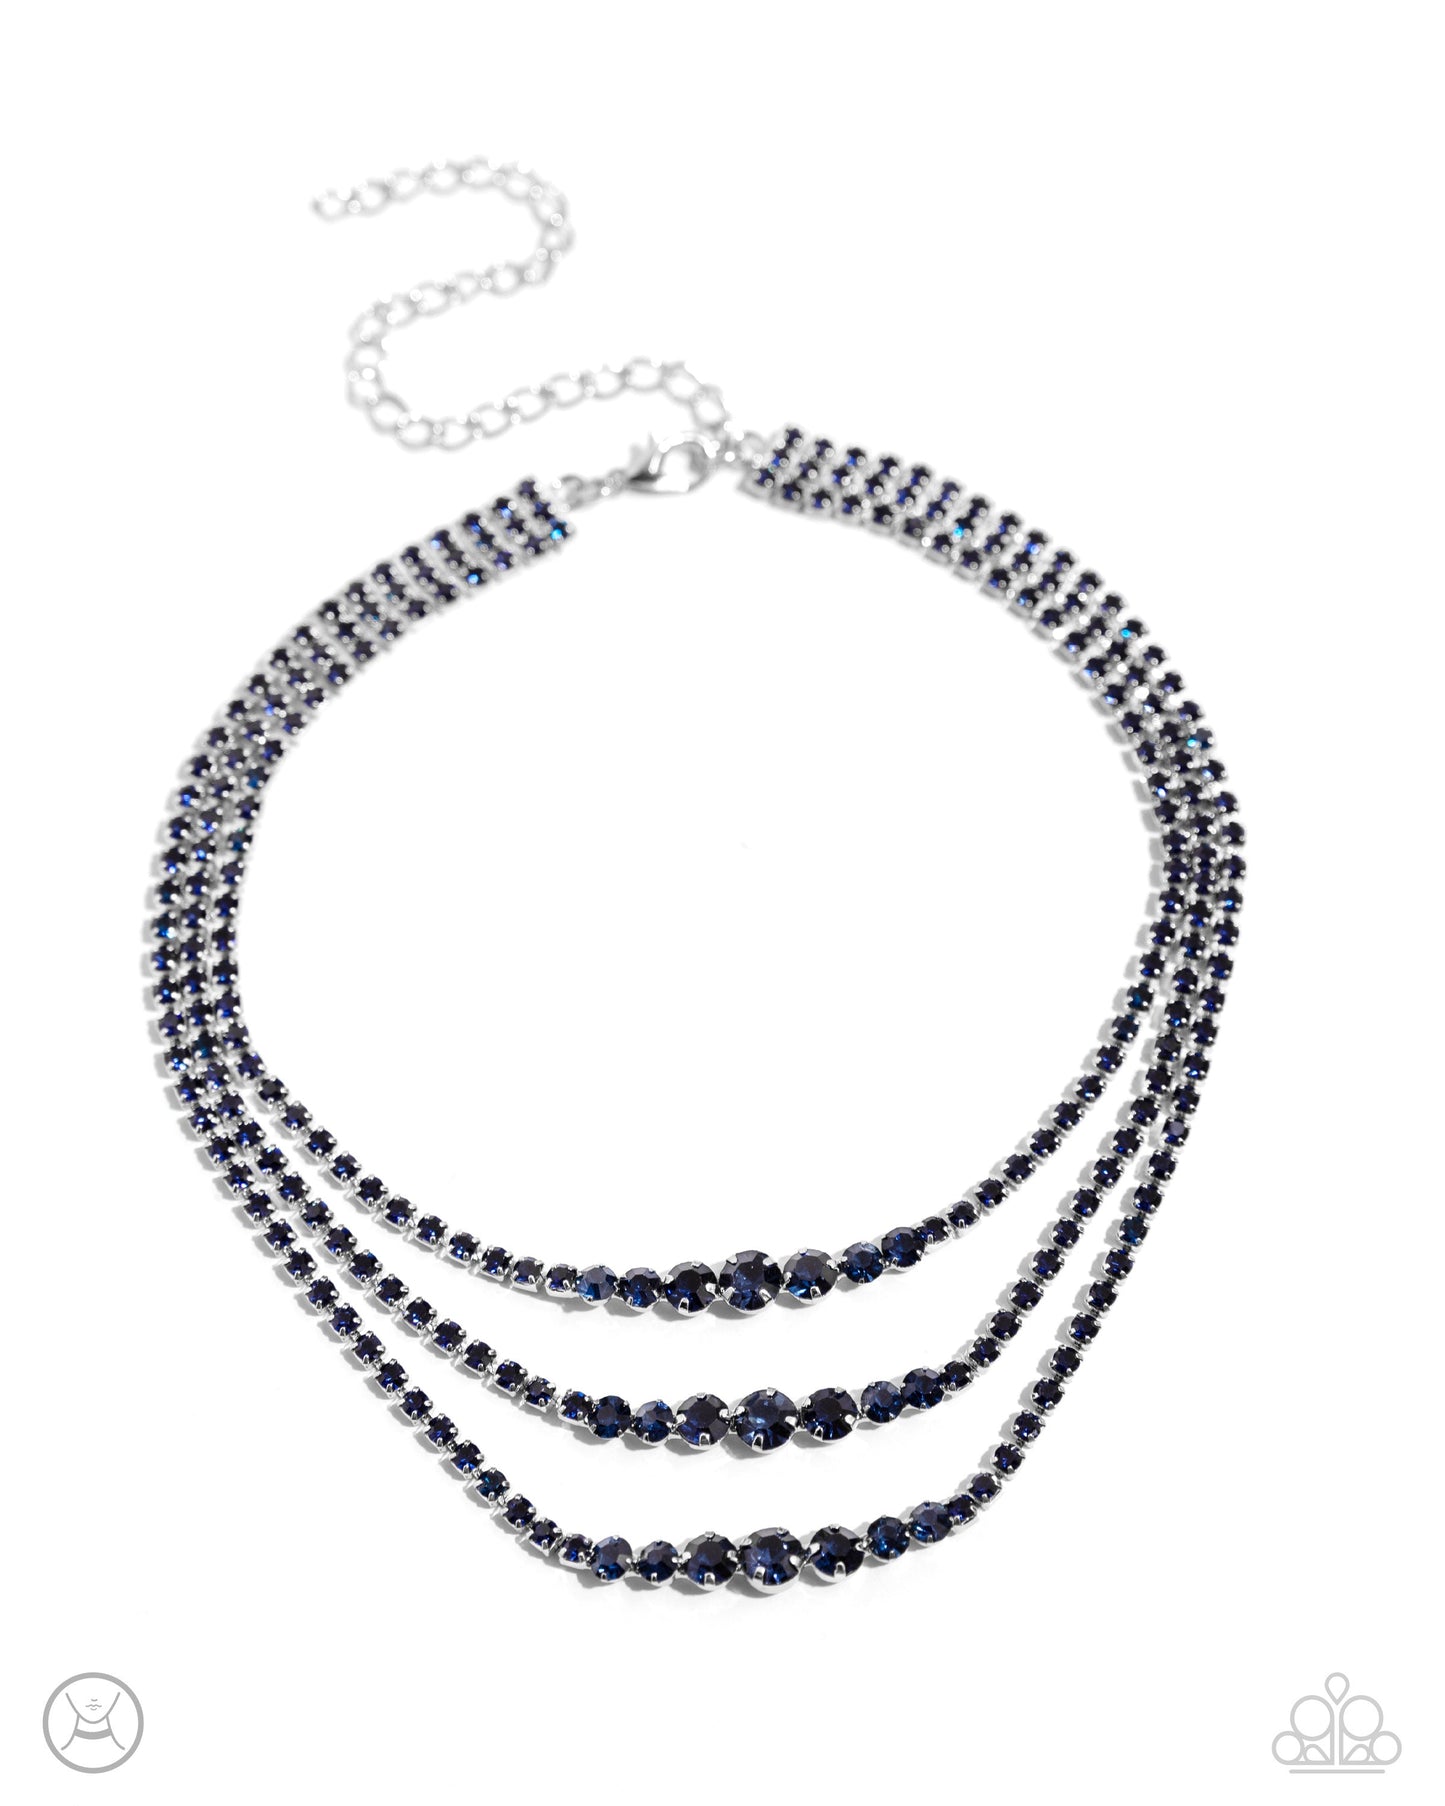 Dynamite Debut - Blue Gem Necklace - Paparazzi Accessories - Set in pronged square silver fittings, blue rhinestones gradually increase to larger blue gems in pronged fittings as they cascade down the chest in a trio of layers for a dynamite display.